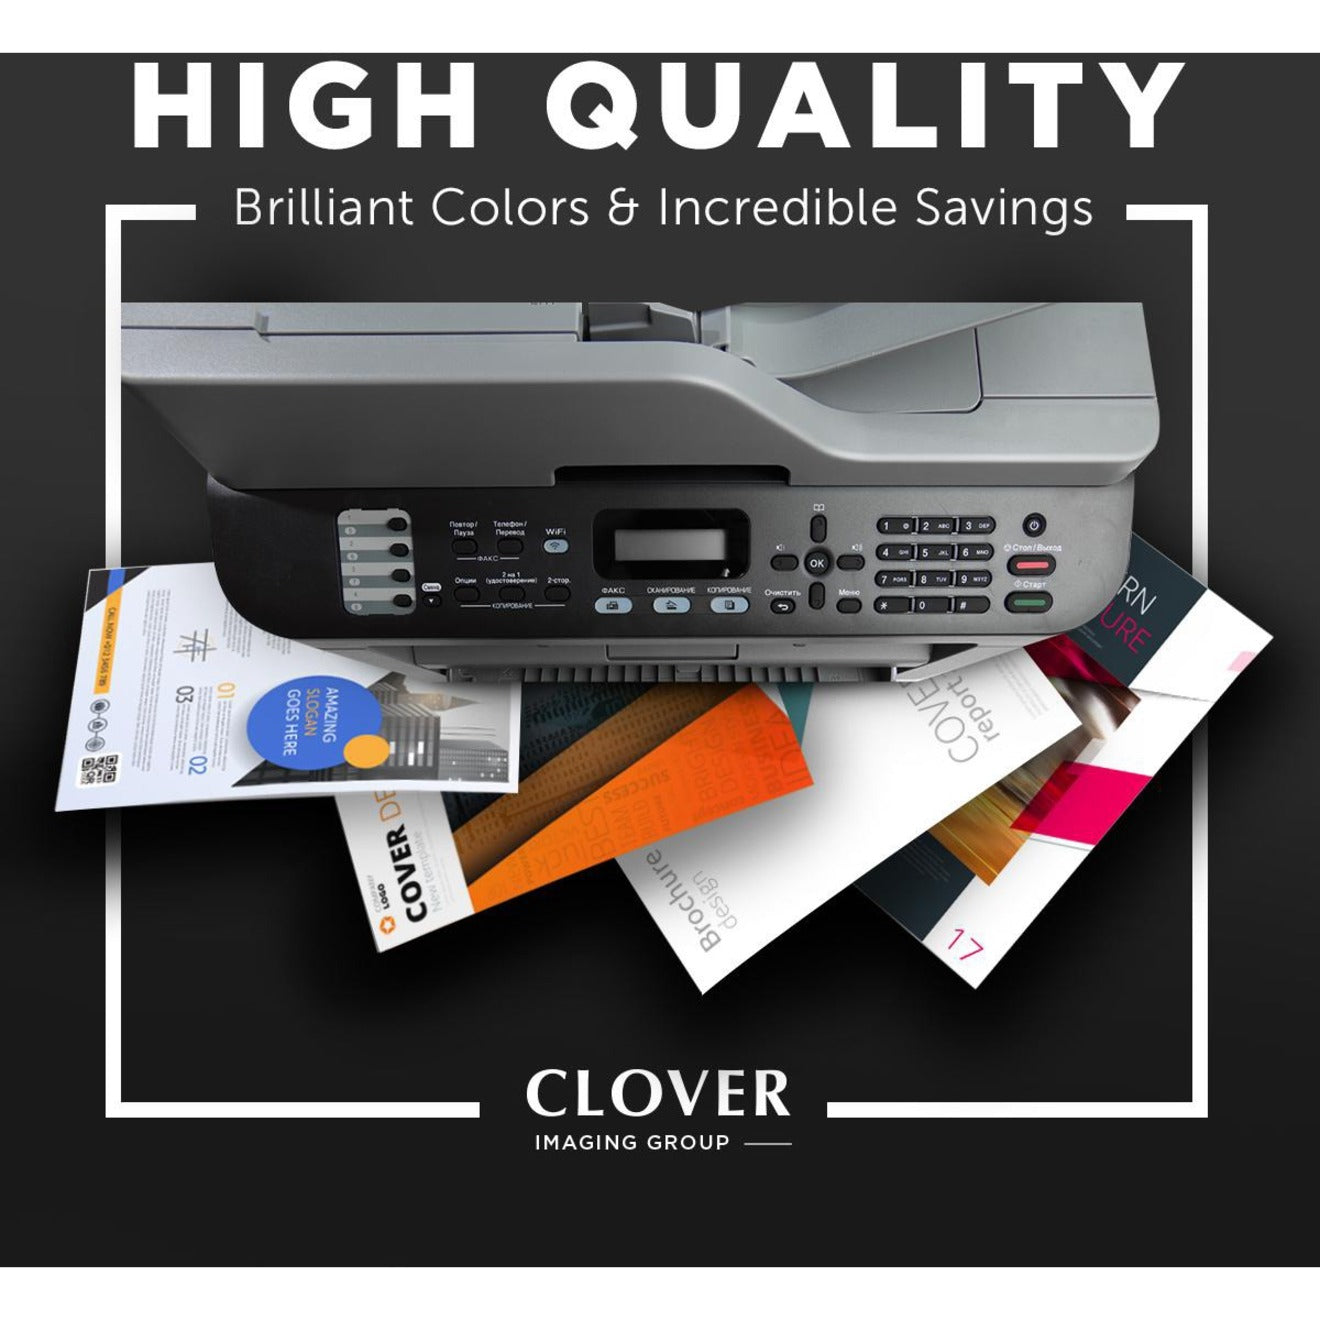 Clover Technologies Remanufactured High Yield Laser Toner Cartridge - Alternative for Brother TN315 TN315C - Cyan Pack